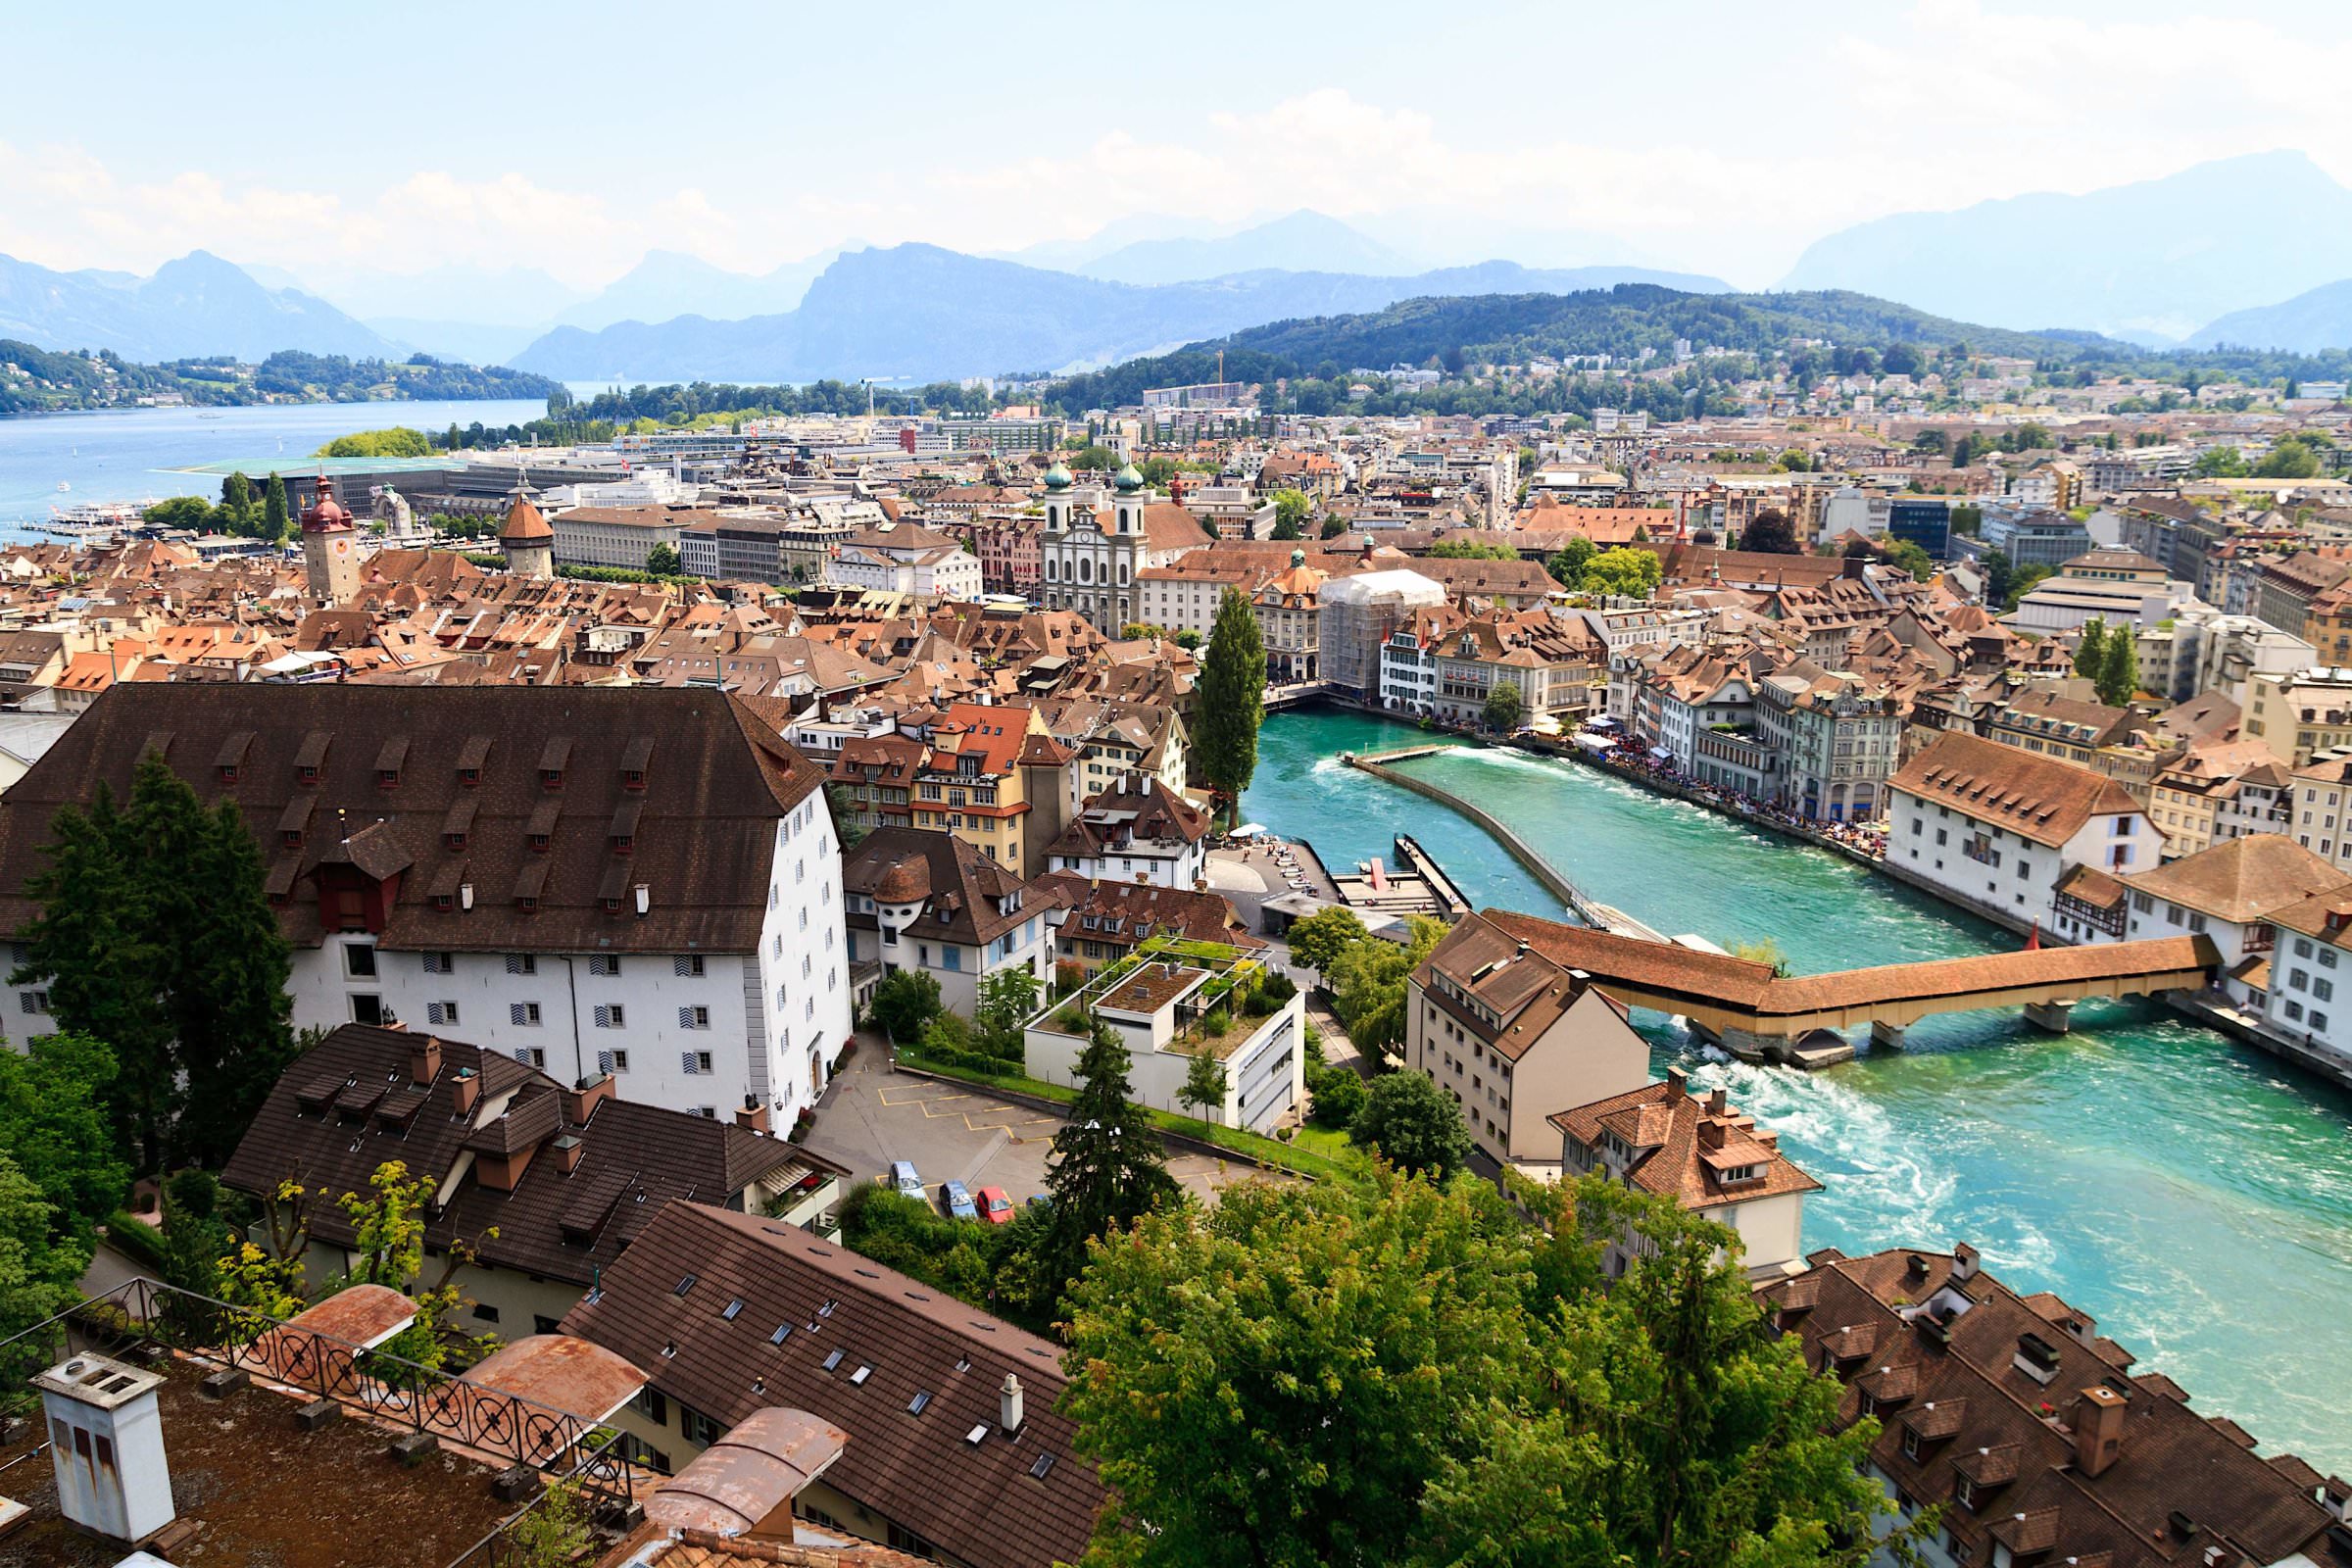 The 5 day Switzerland itinerary for adventure lovers